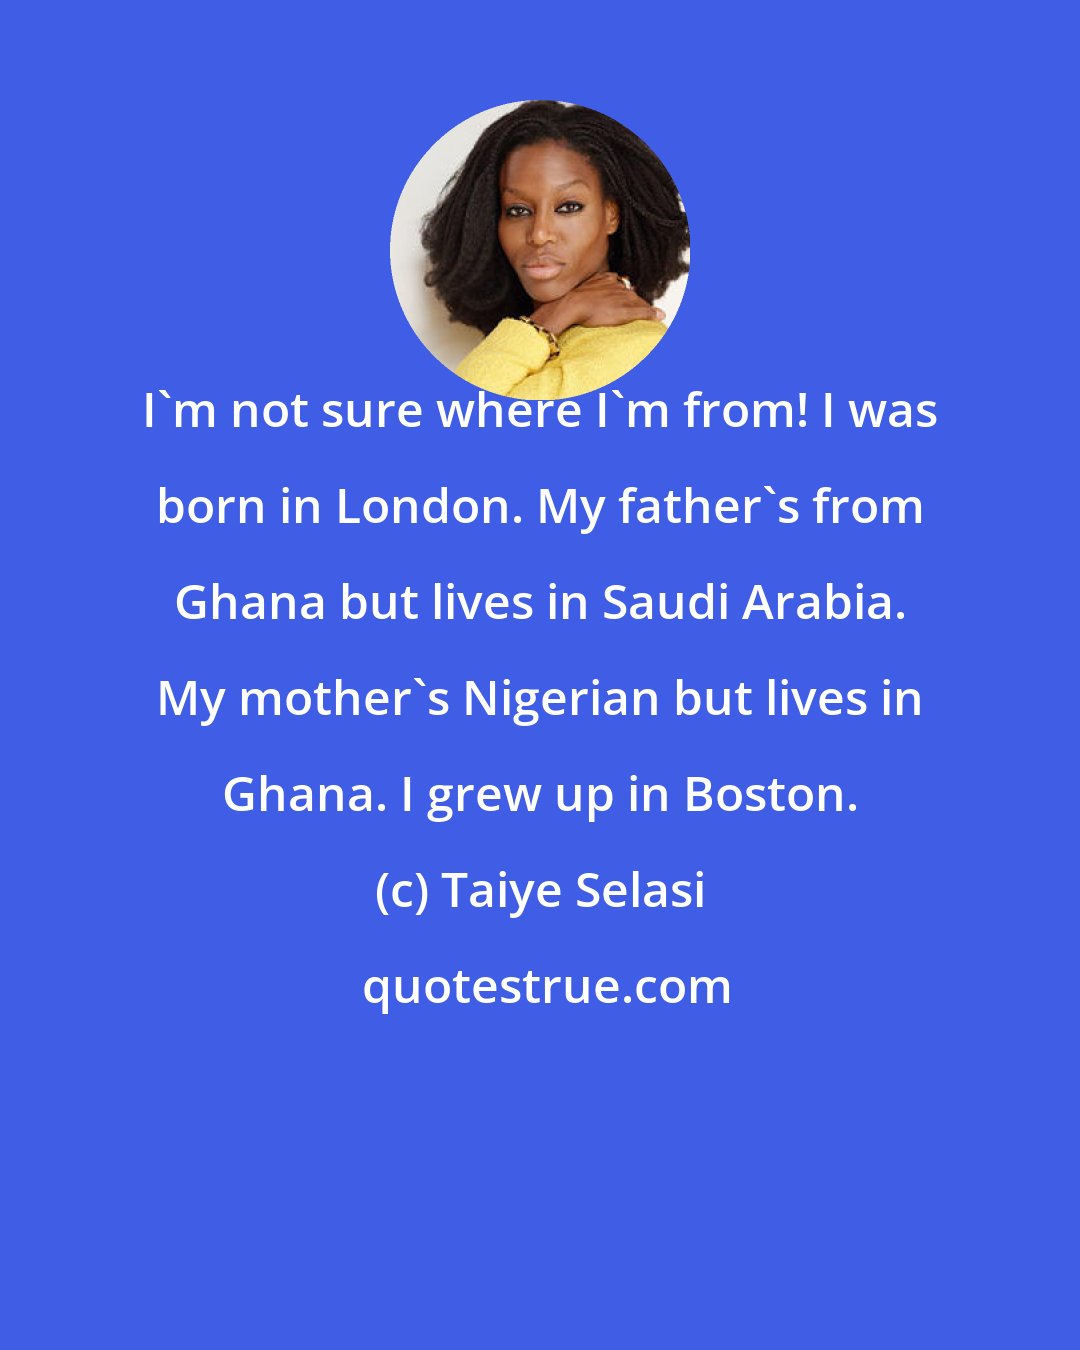 Taiye Selasi: I'm not sure where I'm from! I was born in London. My father's from Ghana but lives in Saudi Arabia. My mother's Nigerian but lives in Ghana. I grew up in Boston.